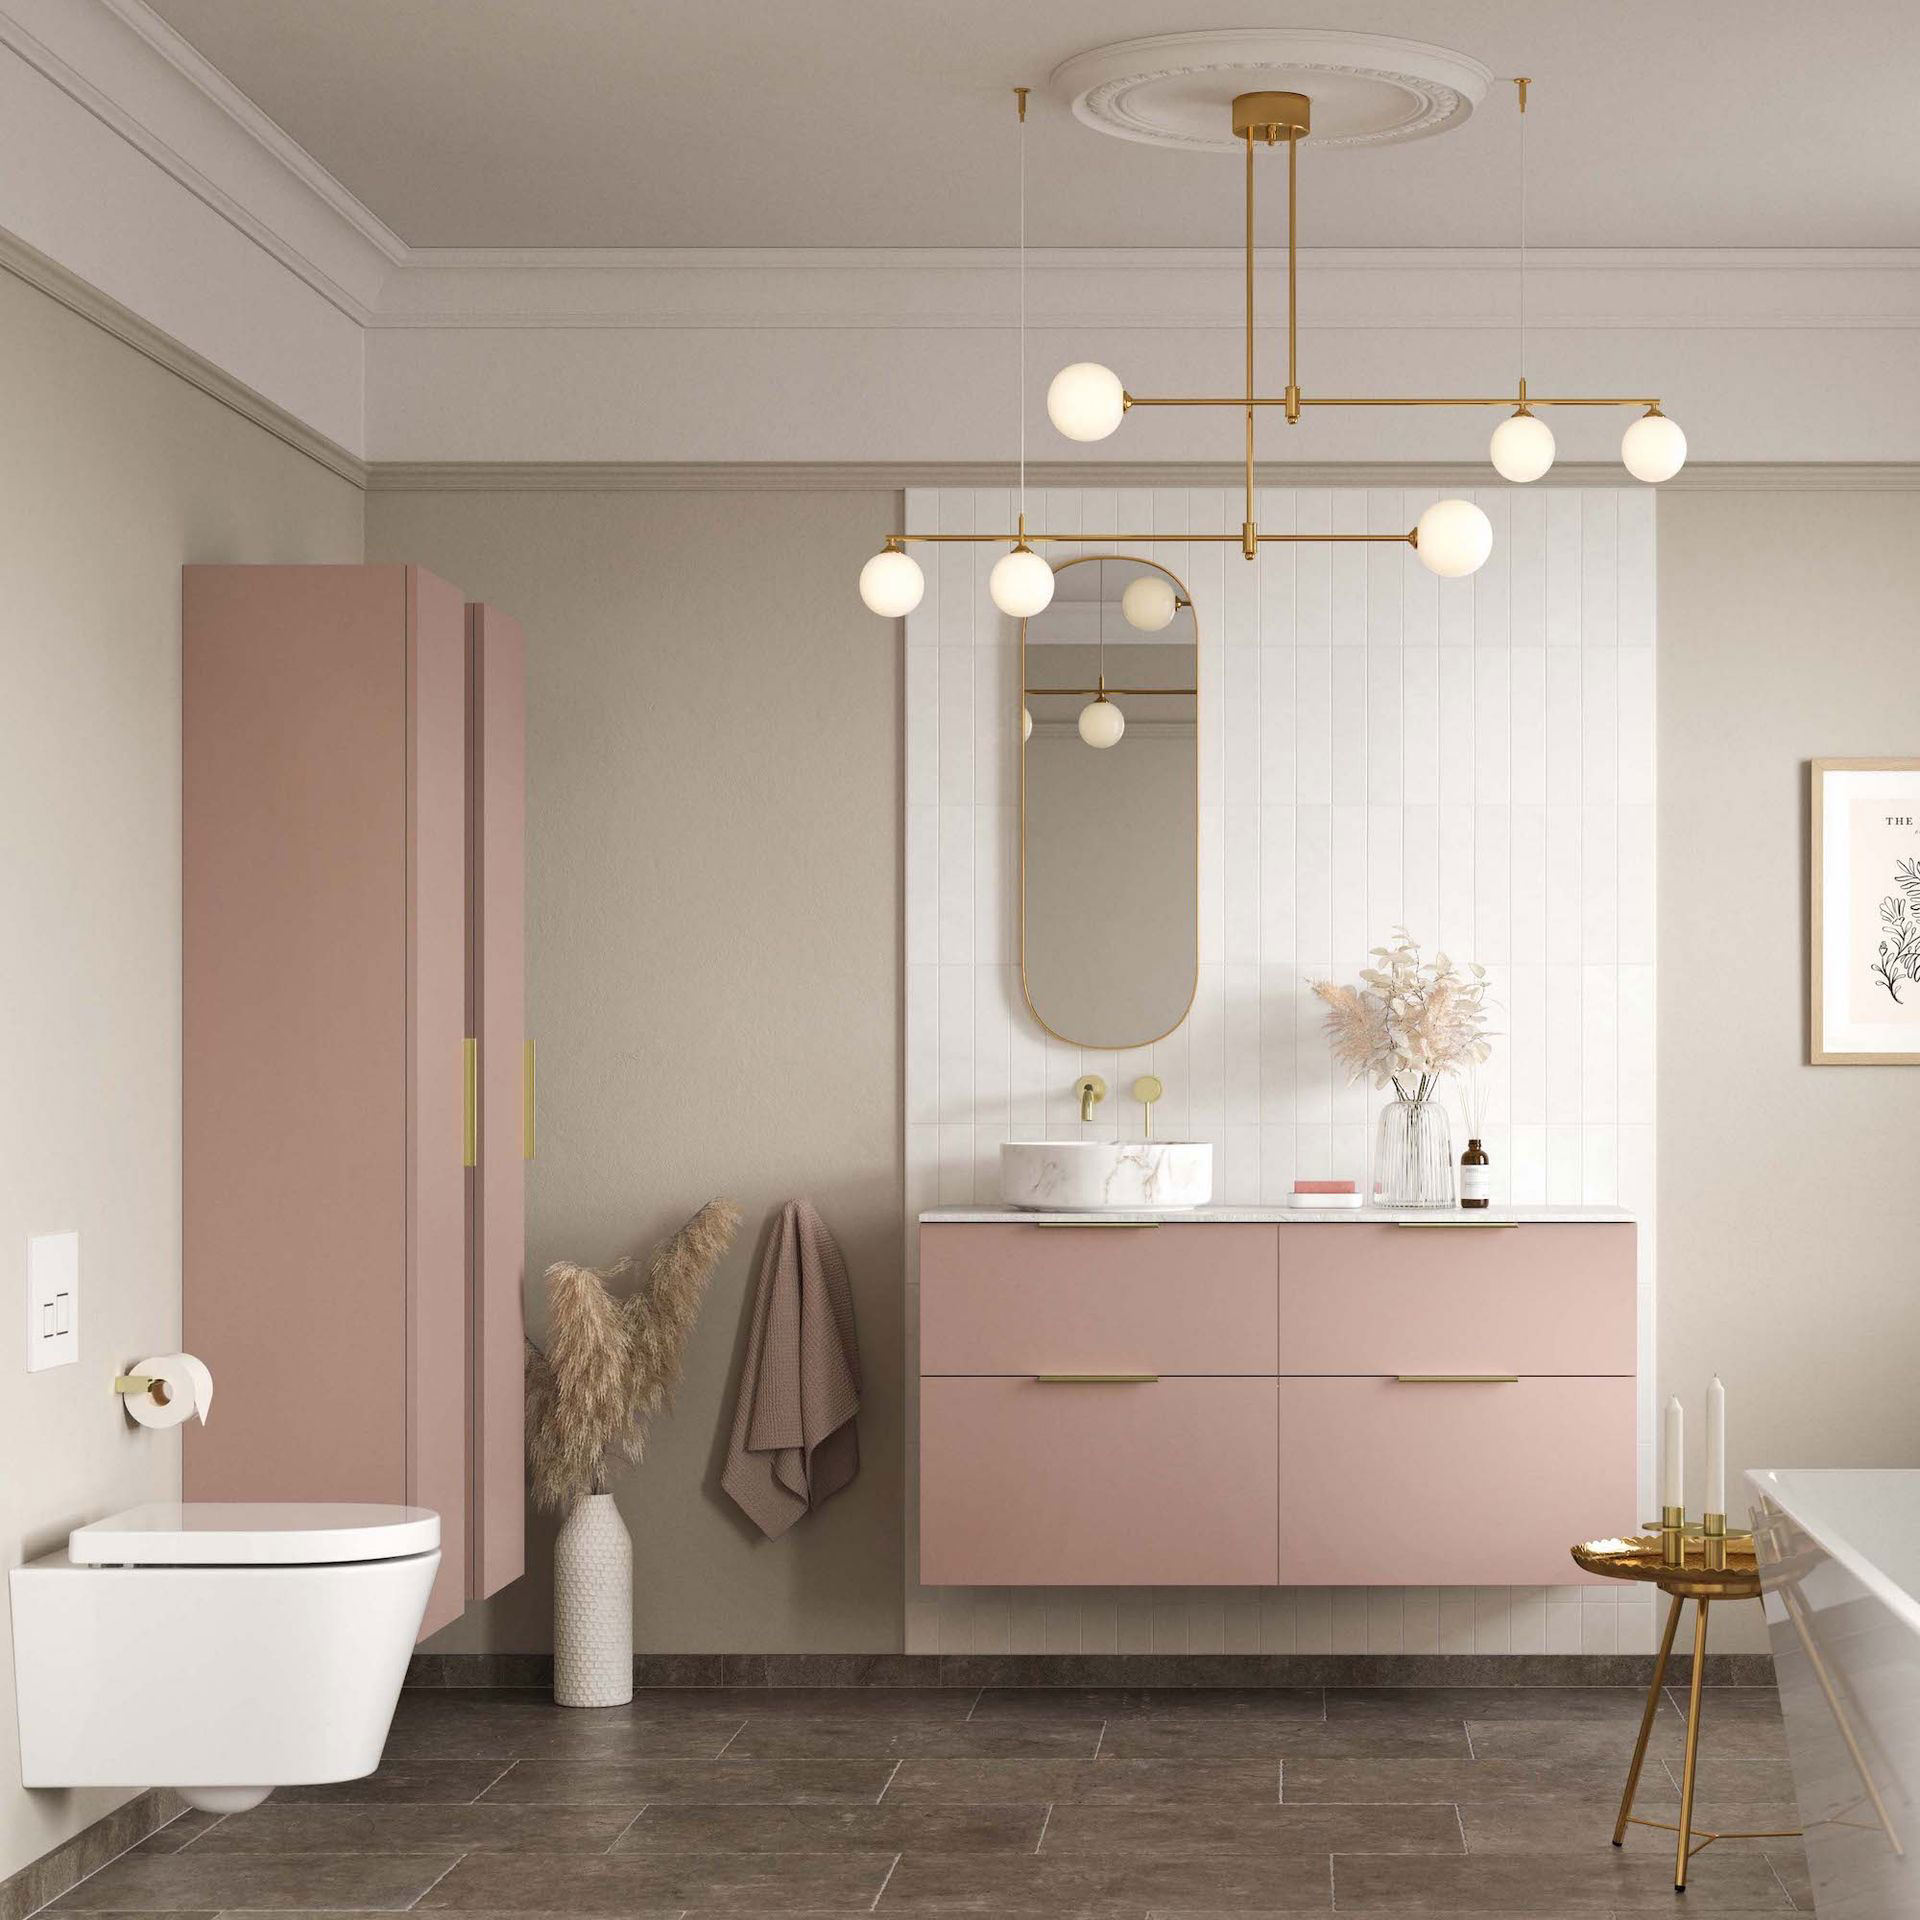 7 common bathroom lighting mistakes, and how you can avoid them